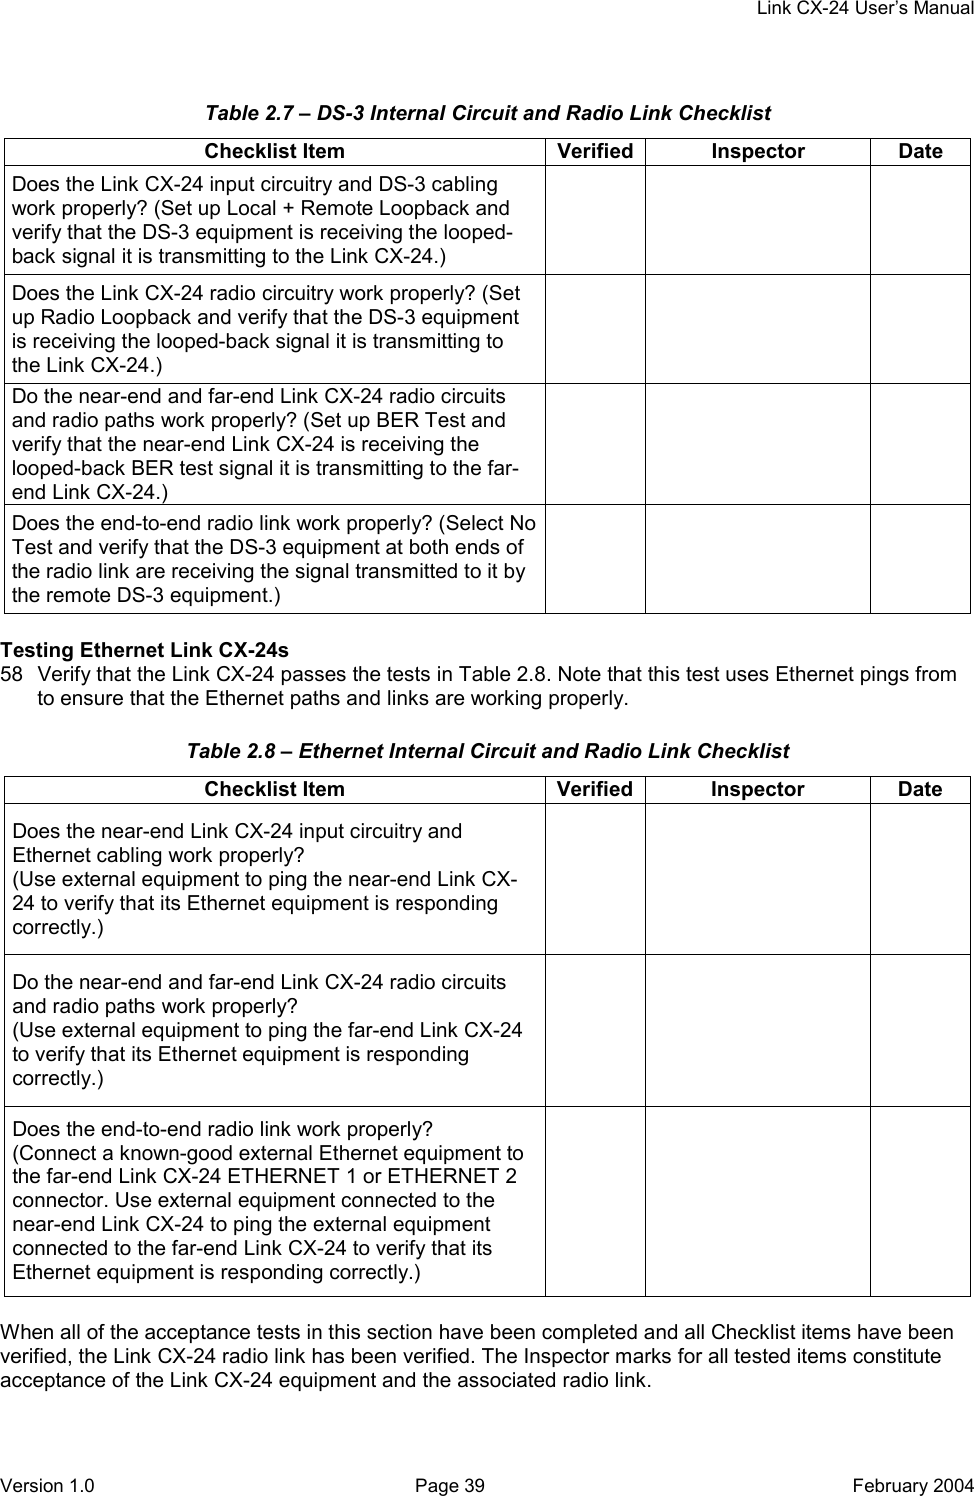     Link CX-24 User’s Manual Version 1.0  Page 39  February 2004 Table 2.7 – DS-3 Internal Circuit and Radio Link Checklist Checklist Item  Verified Inspector  Date Does the Link CX-24 input circuitry and DS-3 cabling work properly? (Set up Local + Remote Loopback and verify that the DS-3 equipment is receiving the looped-back signal it is transmitting to the Link CX-24.)     Does the Link CX-24 radio circuitry work properly? (Set up Radio Loopback and verify that the DS-3 equipment is receiving the looped-back signal it is transmitting to the Link CX-24.)     Do the near-end and far-end Link CX-24 radio circuits and radio paths work properly? (Set up BER Test and verify that the near-end Link CX-24 is receiving the looped-back BER test signal it is transmitting to the far-end Link CX-24.)     Does the end-to-end radio link work properly? (Select No Test and verify that the DS-3 equipment at both ends of the radio link are receiving the signal transmitted to it by the remote DS-3 equipment.)      Testing Ethernet Link CX-24s 58  Verify that the Link CX-24 passes the tests in Table 2.8. Note that this test uses Ethernet pings from to ensure that the Ethernet paths and links are working properly. Table 2.8 – Ethernet Internal Circuit and Radio Link Checklist Checklist Item  Verified Inspector  Date Does the near-end Link CX-24 input circuitry and Ethernet cabling work properly? (Use external equipment to ping the near-end Link CX-24 to verify that its Ethernet equipment is responding correctly.)     Do the near-end and far-end Link CX-24 radio circuits and radio paths work properly? (Use external equipment to ping the far-end Link CX-24 to verify that its Ethernet equipment is responding correctly.)     Does the end-to-end radio link work properly? (Connect a known-good external Ethernet equipment to the far-end Link CX-24 ETHERNET 1 or ETHERNET 2 connector. Use external equipment connected to the near-end Link CX-24 to ping the external equipment connected to the far-end Link CX-24 to verify that its Ethernet equipment is responding correctly.)      When all of the acceptance tests in this section have been completed and all Checklist items have been verified, the Link CX-24 radio link has been verified. The Inspector marks for all tested items constitute acceptance of the Link CX-24 equipment and the associated radio link.  